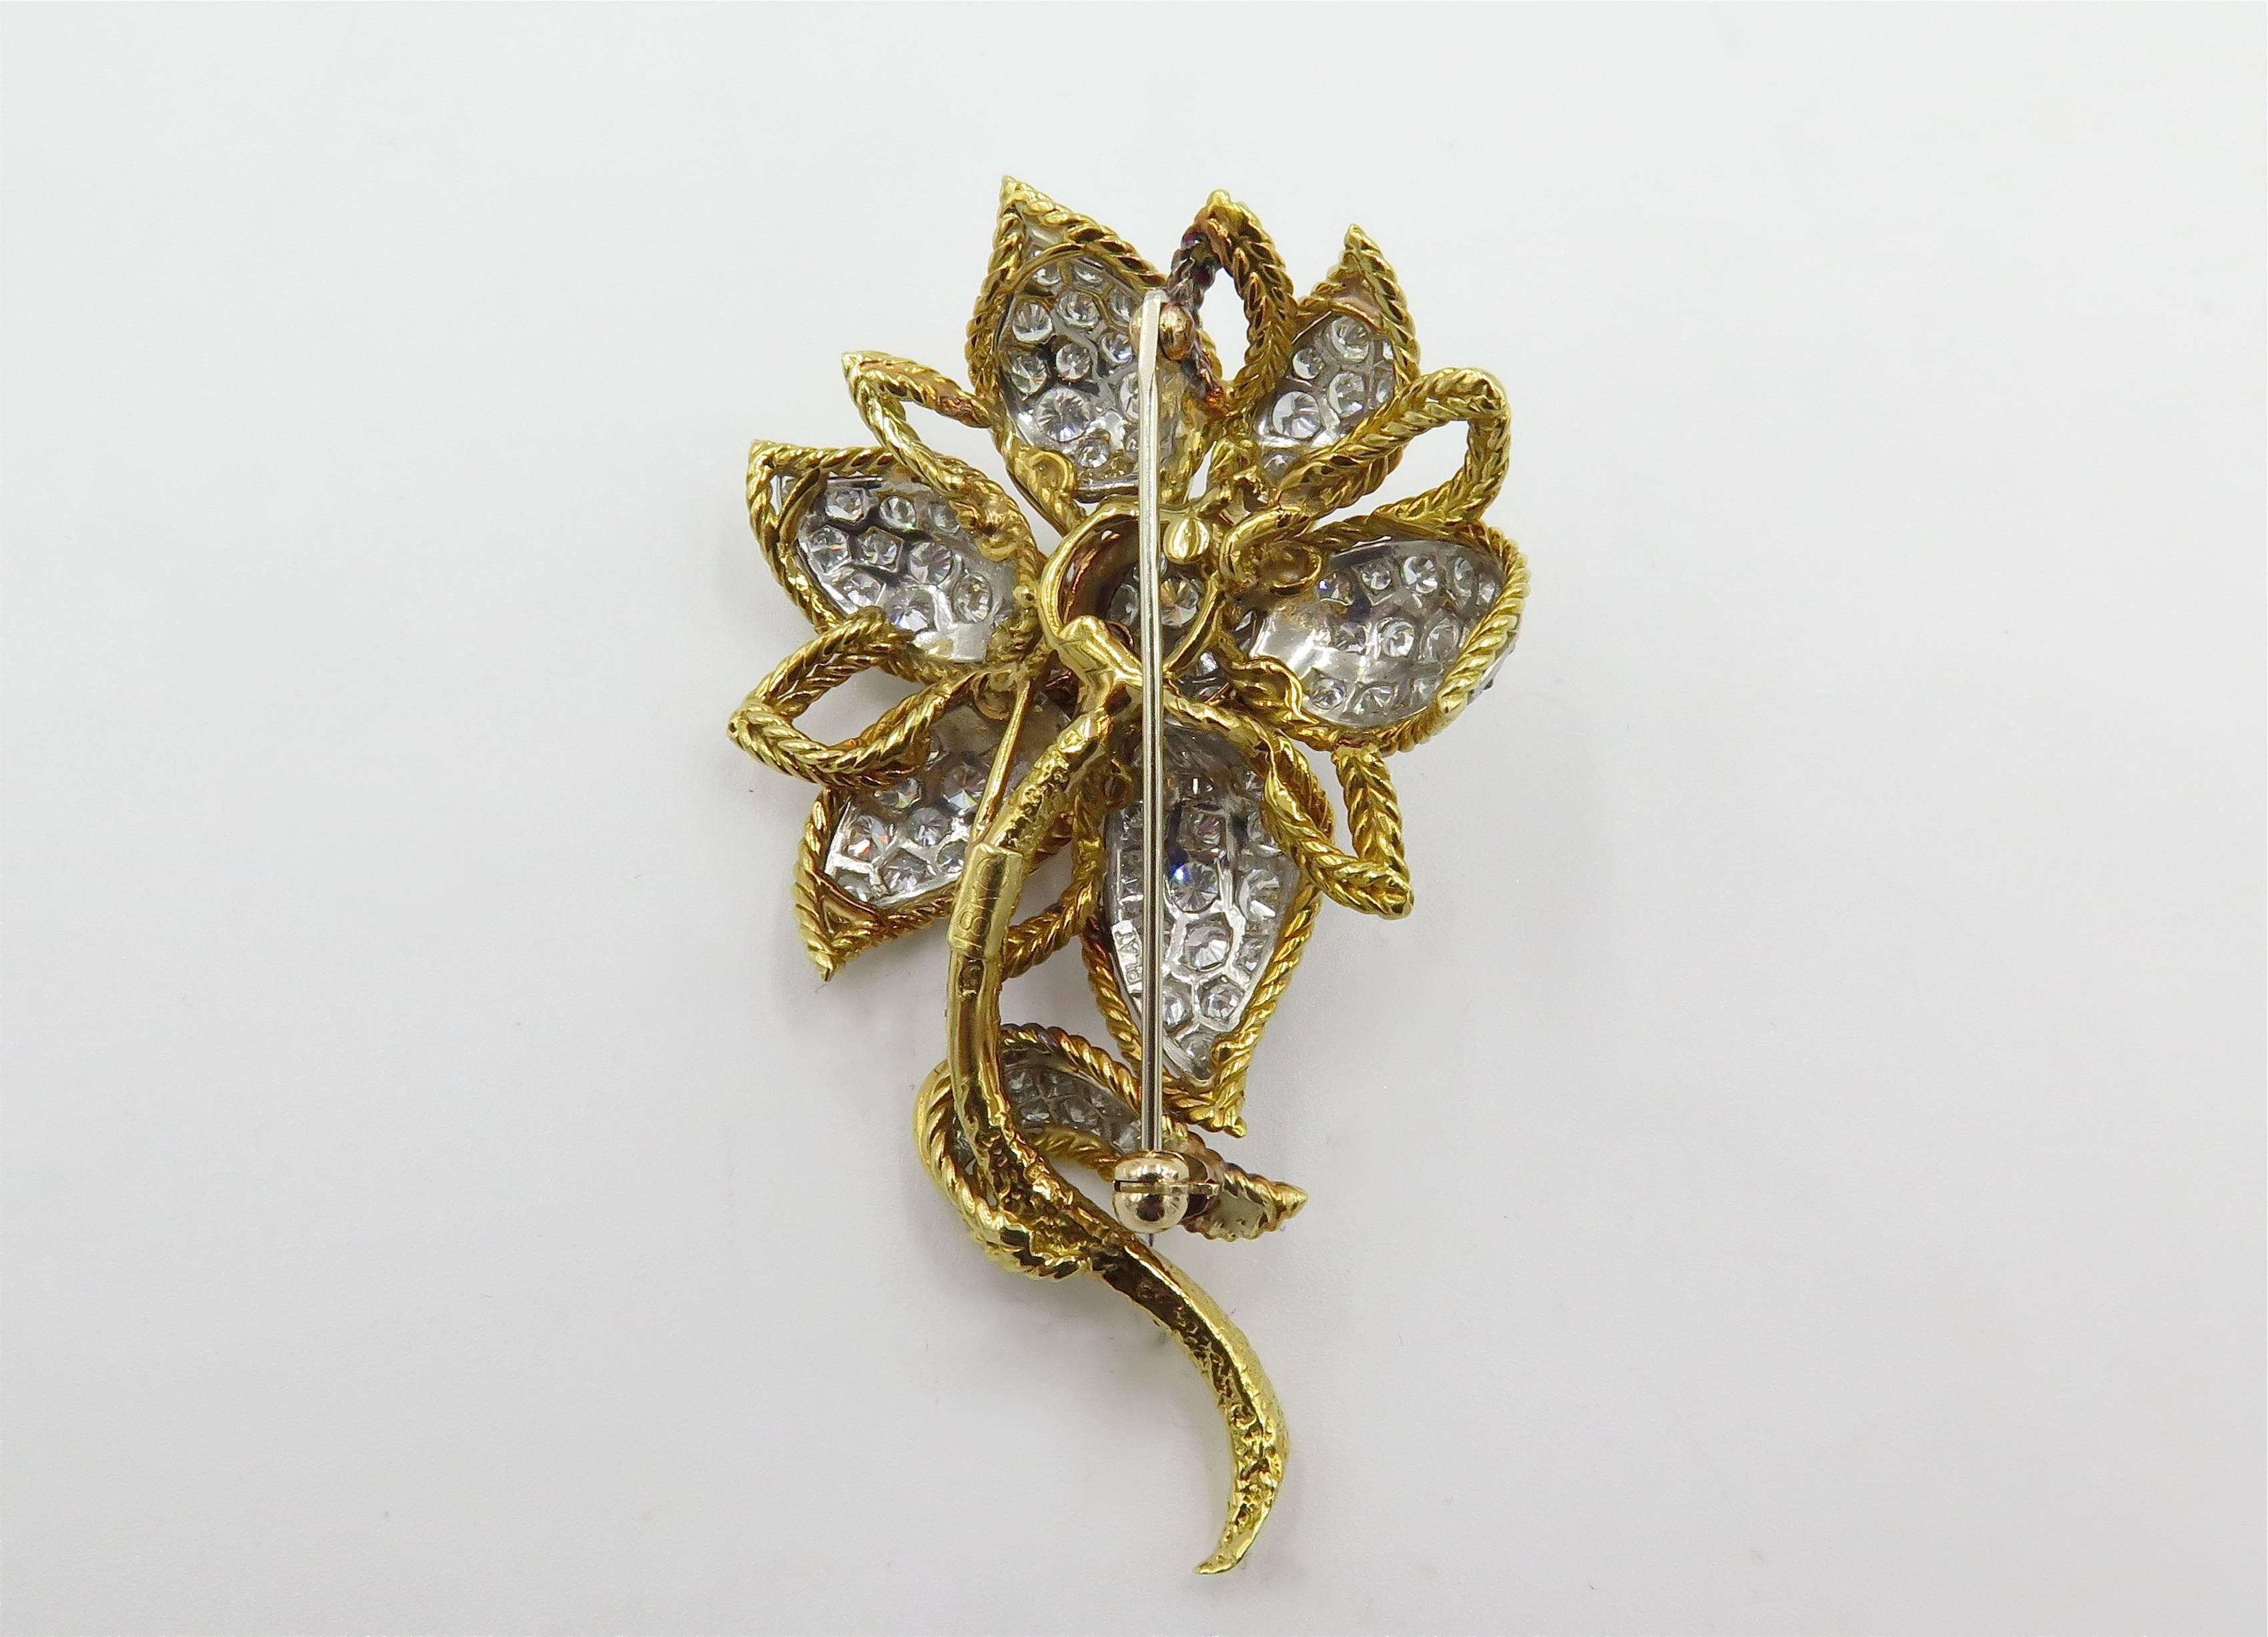 An 15 karat yellow gold, platinum and diamond flower brooch. Circa 1960. Designed as a rope work daisy, with pave set diamond petals and leaves. Eighty (80) diamonds weigh approximately 5.00 carats. Length is approximately 2 1/2 inches. Gross weight